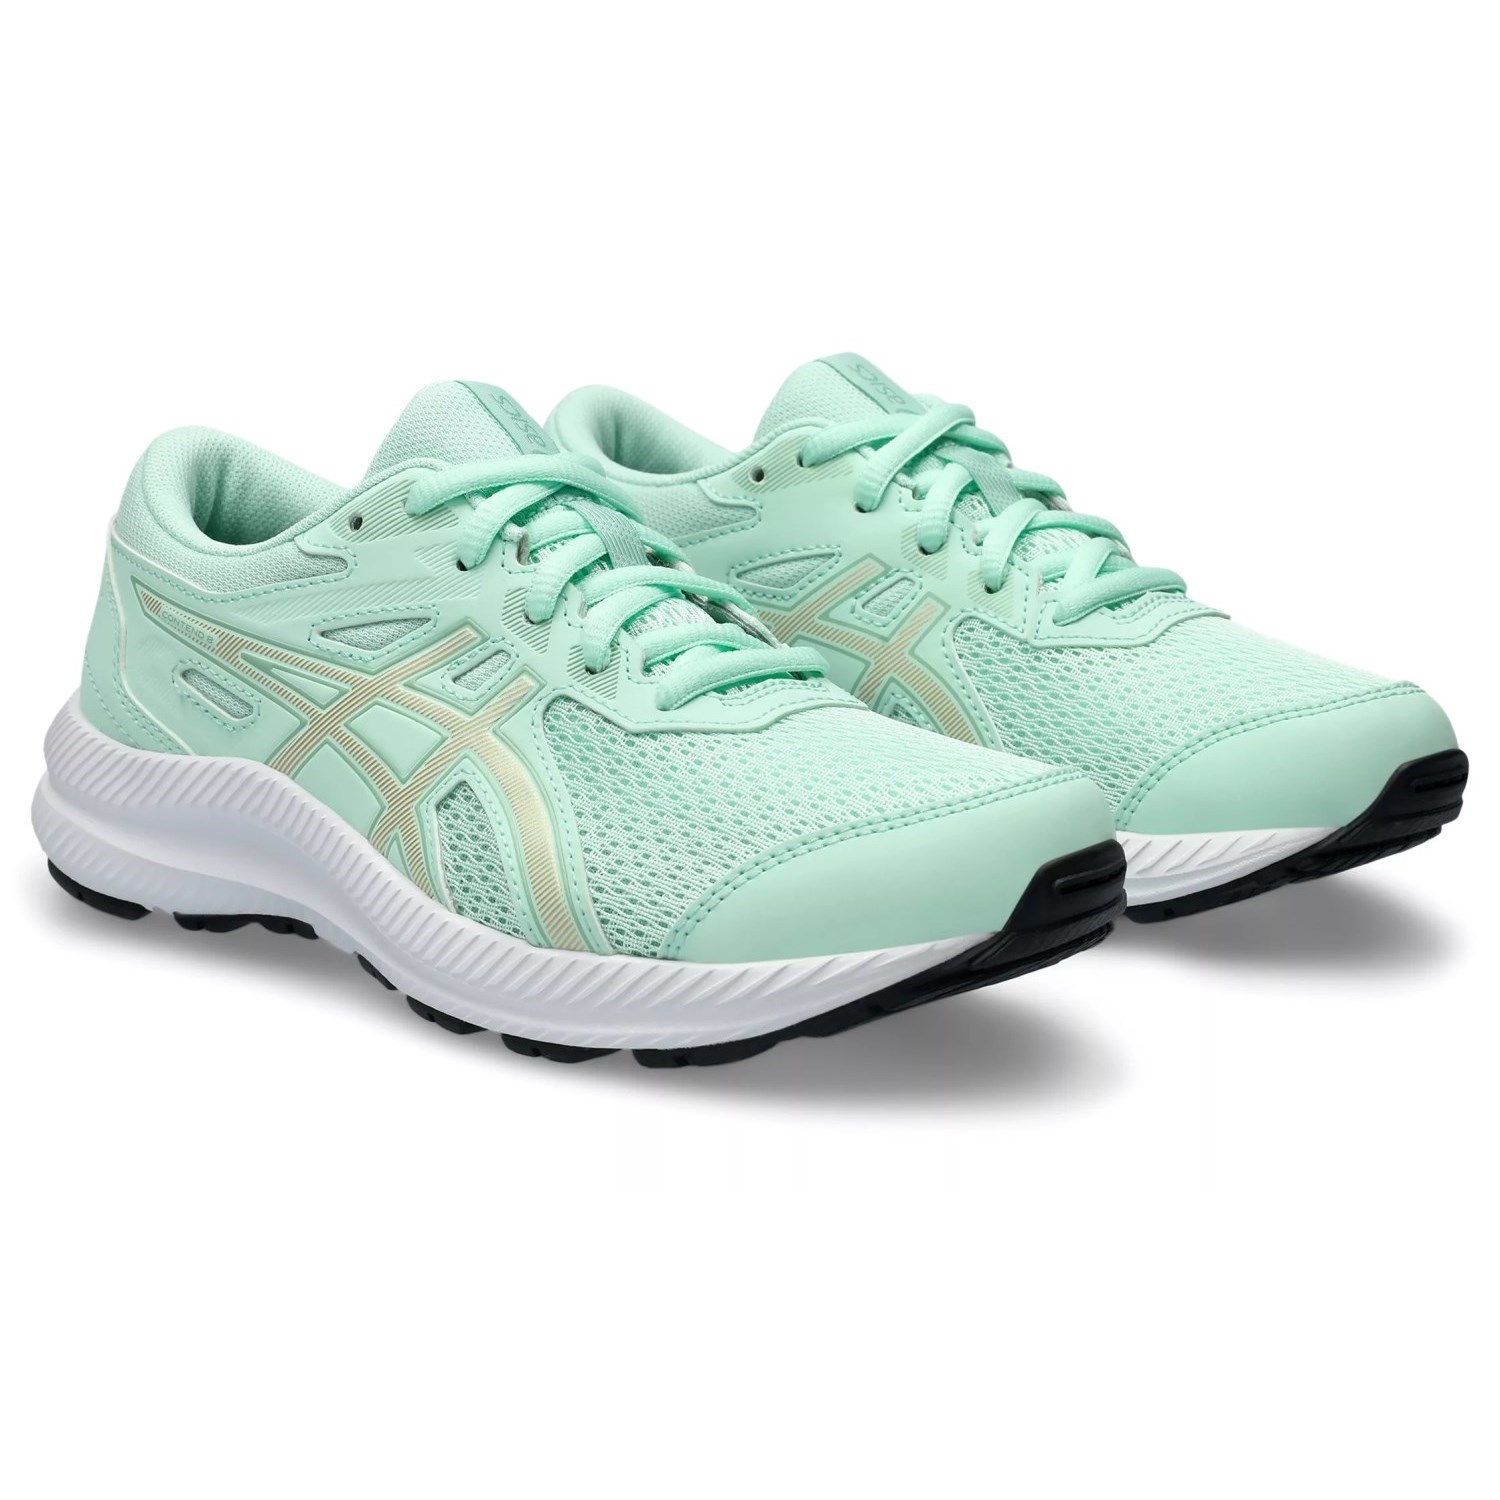 Asics Contend 8 GS - Kids Running Shoes - Mint Tint/Champagne | Sportitude